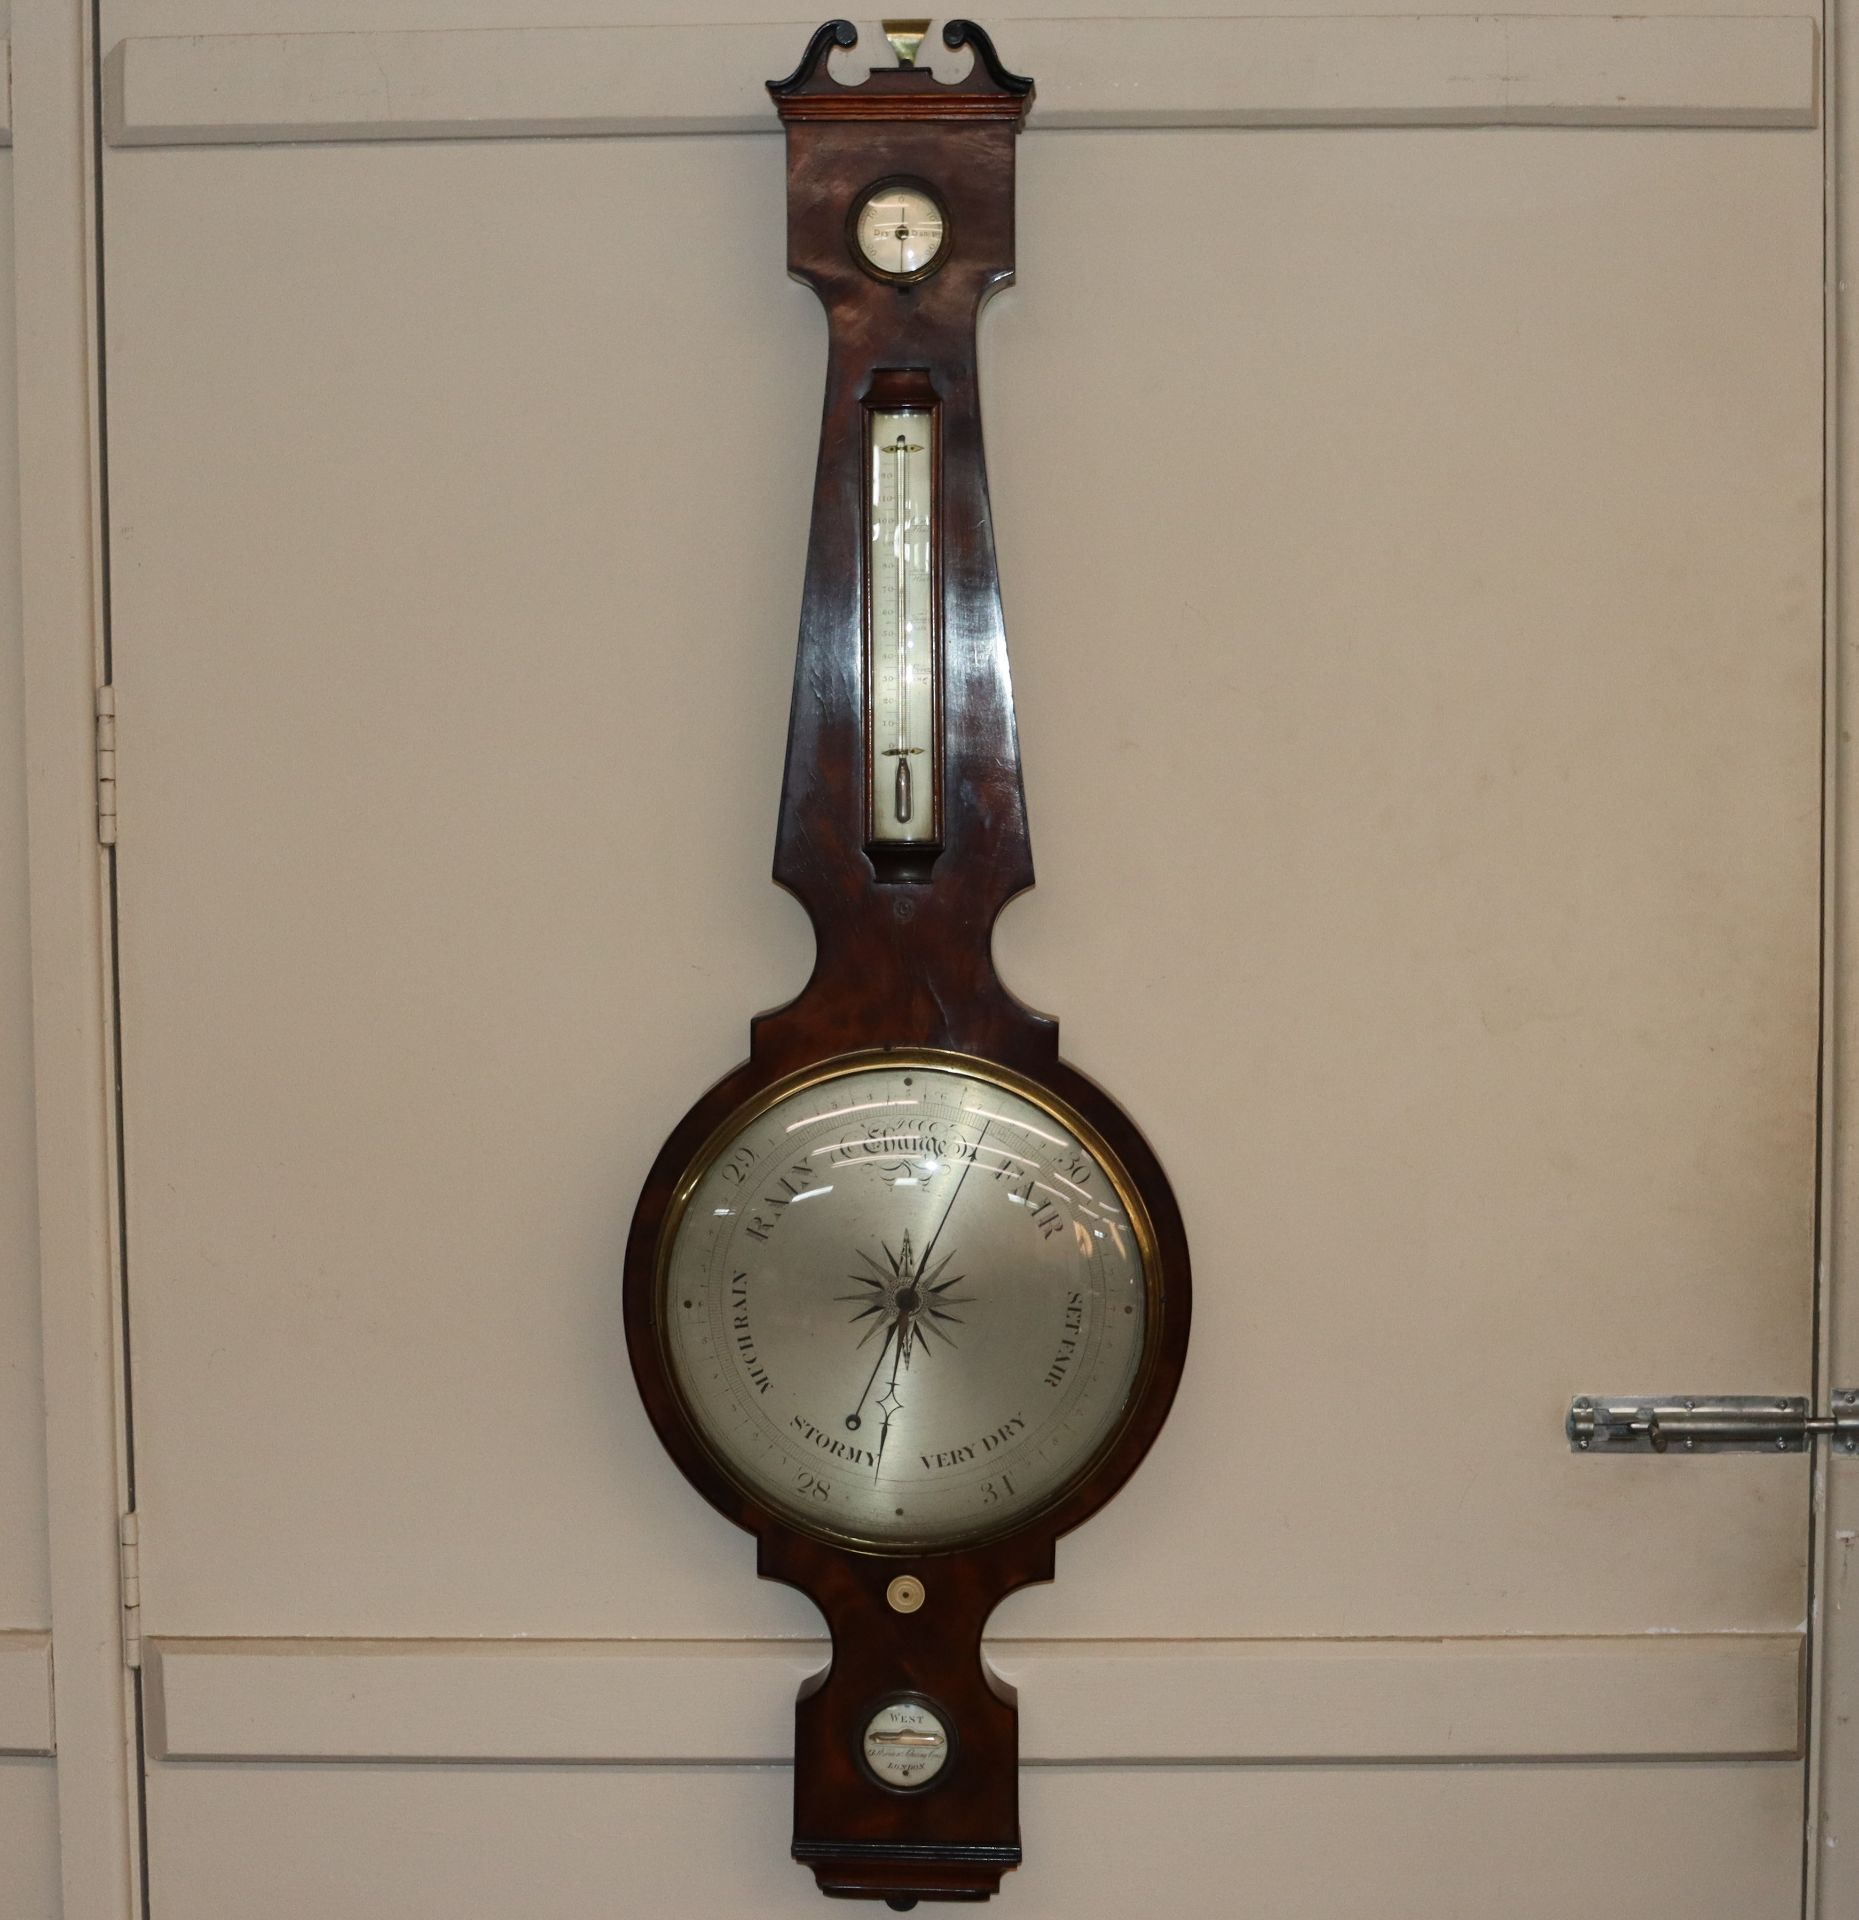 A 19th Century figured mahogany wheel barometer by West, Charing Cross, London, having large